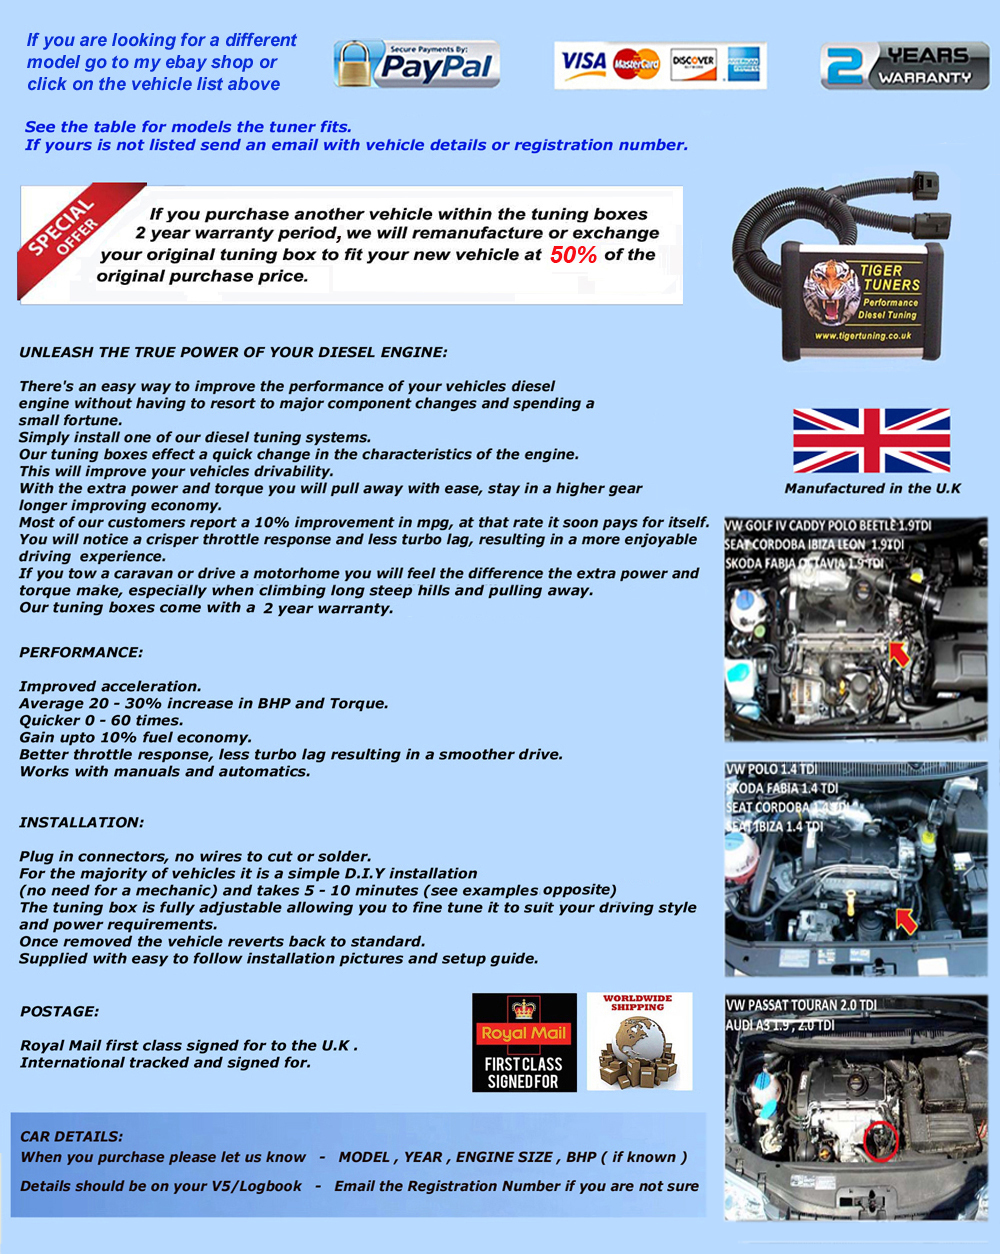 Increase your vehicles performance and save on fuel
unleash the power of your diesel engine
There's an easy way to improve the performance of your vehicles 
common rail  diesel engine without having to resort to major  
component changes and spending  a small fortune. Simply install  
one of our diesel tuning systems